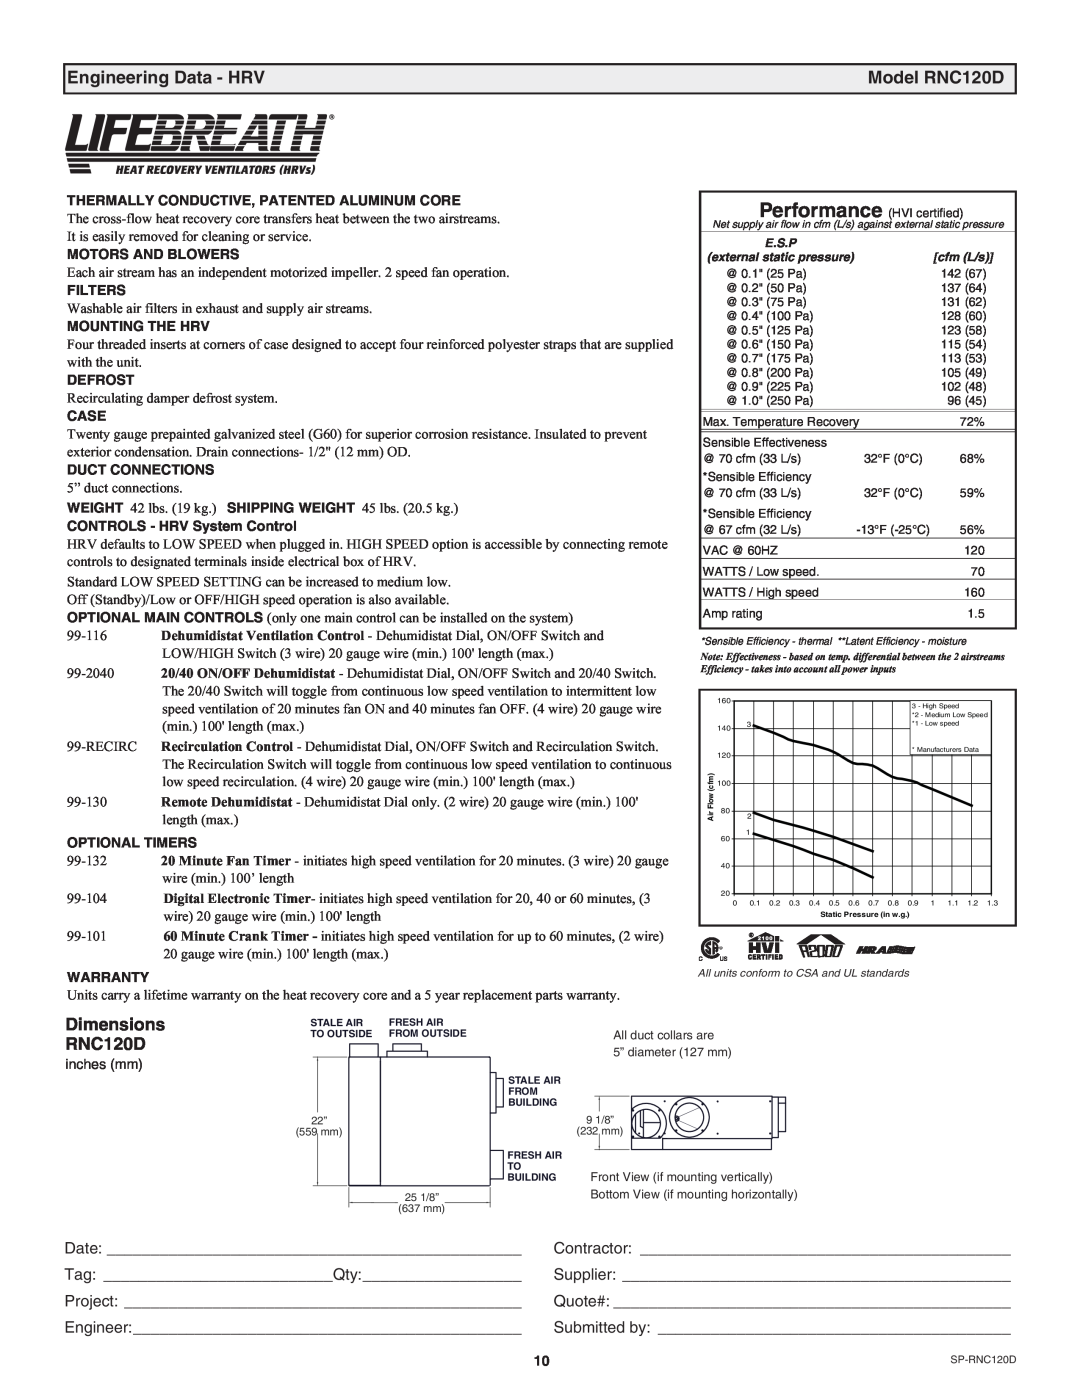 Lifebreath RNC5-TPD, RNC200, RNC10, RNC95 manual Engineering Data - HRV, Model RNC120D, Dimensions, Date, Tag Qty, Project 